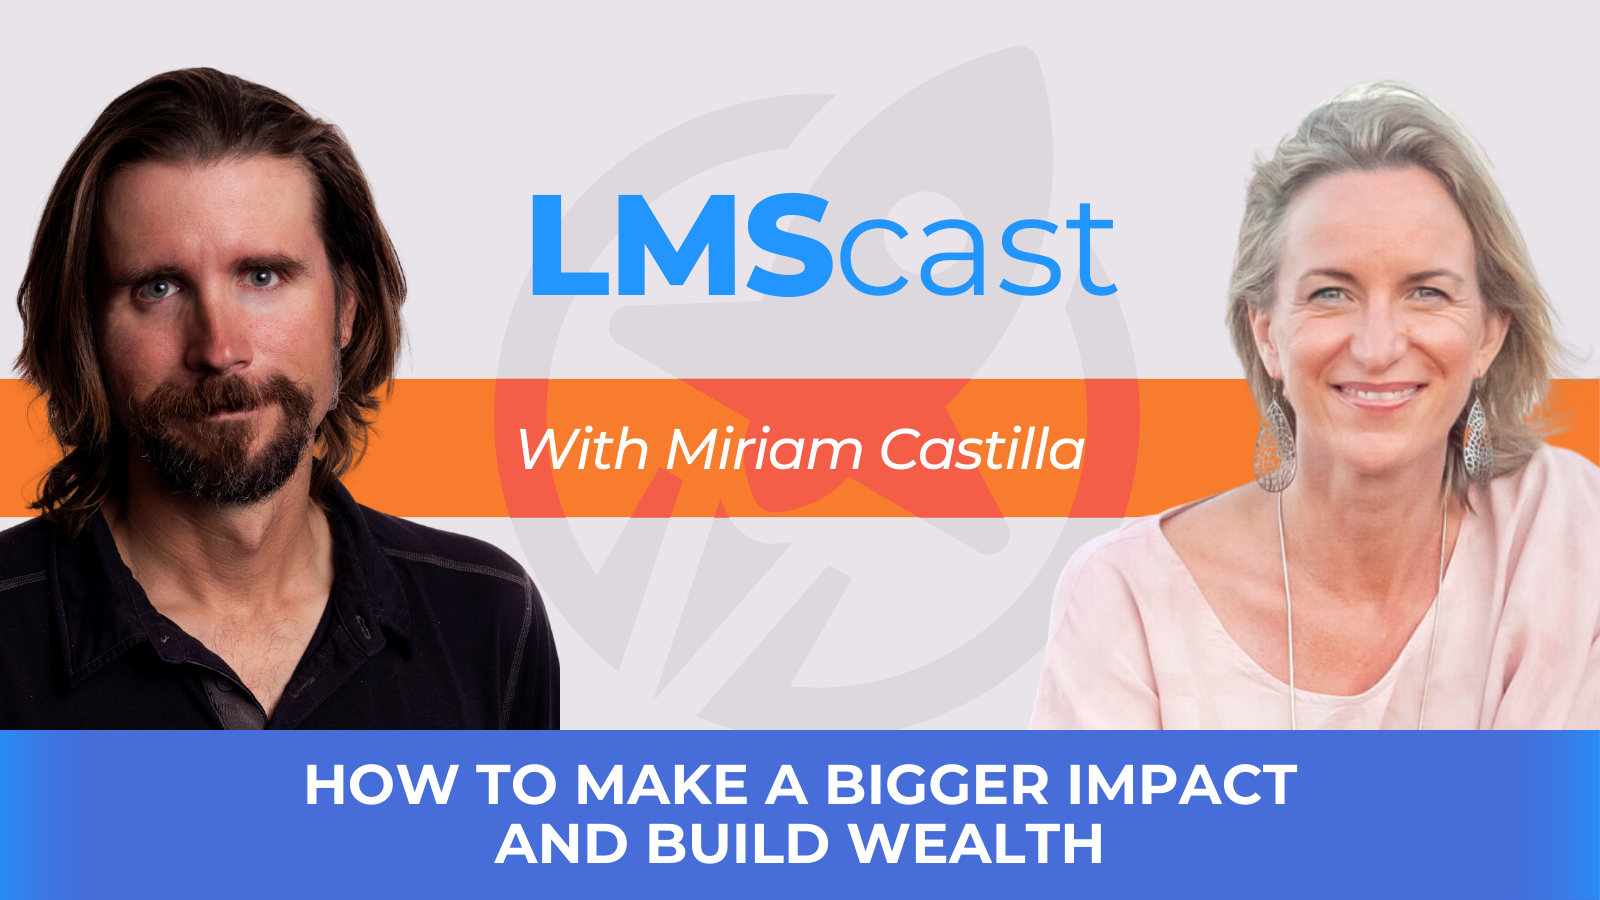 How to Make a Bigger Impact and Build Wealth with Miriam Castilla